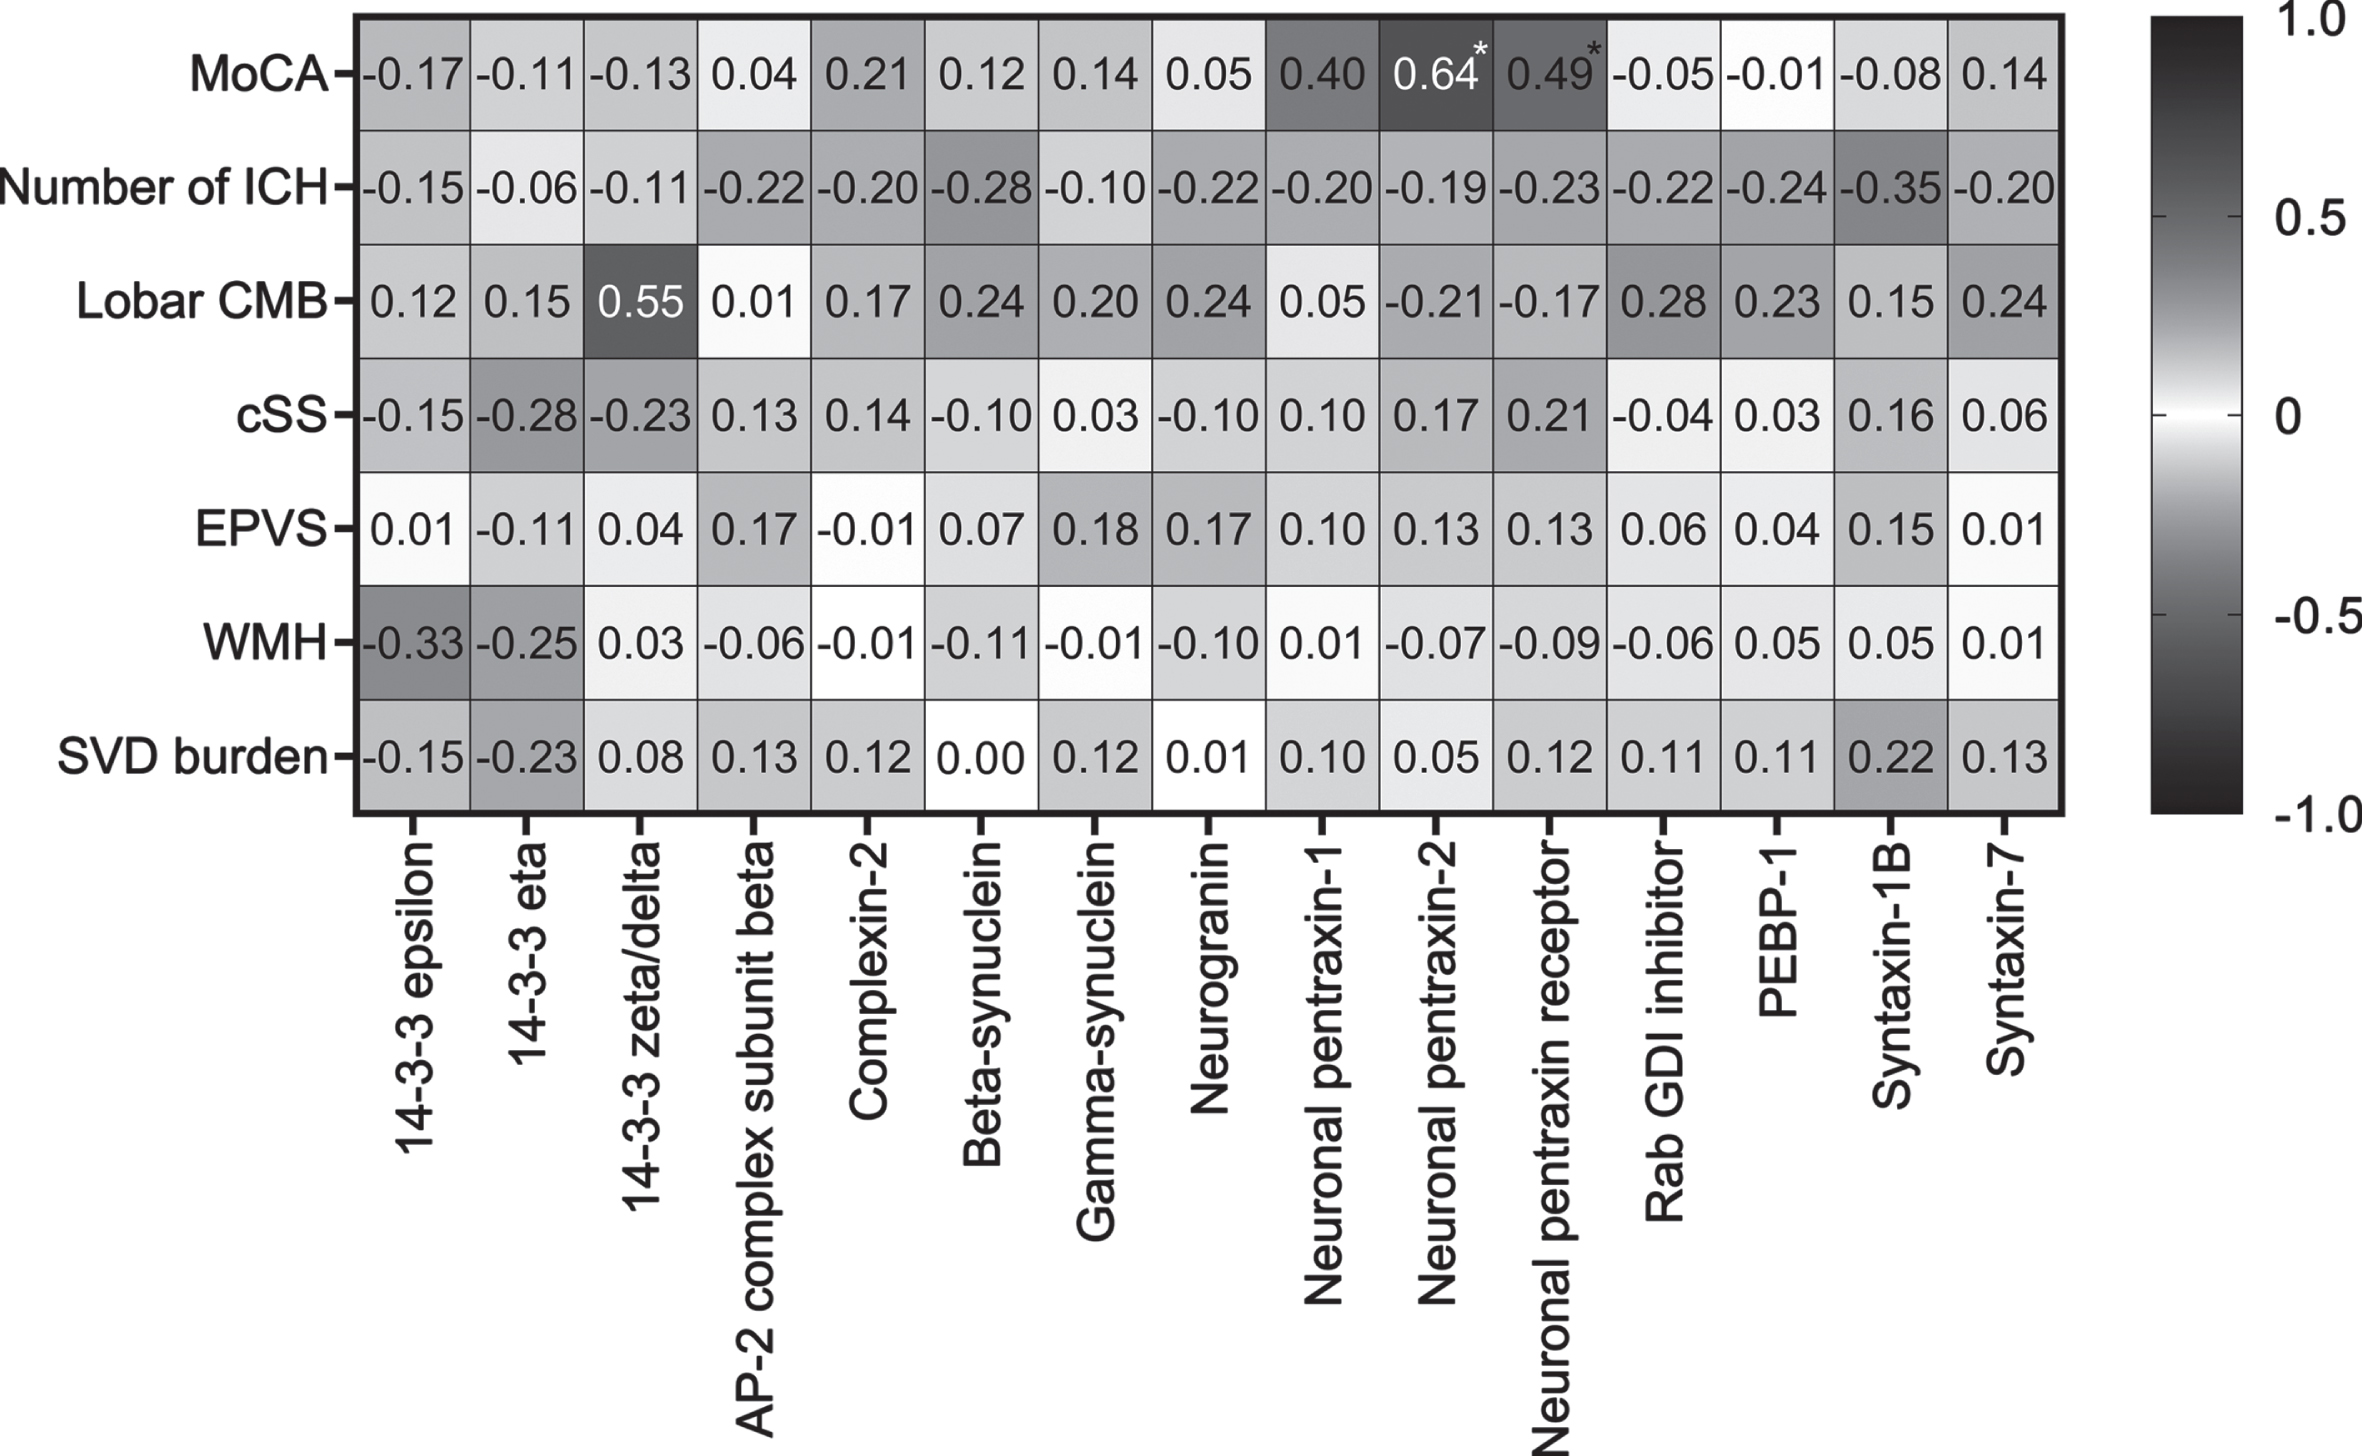 Correlations of synaptic proteins with MoCA score and cerebrovascular imaging markers in CAA patients. Spearman rank correlation coefficients are displayed. MoCA was available in a subset (n = 21) of CAA patients. Asterix indicates a significant p value. AP-2, activating protein 2; CMB, cerebral microbleeds; cSS, cortical superficial siderosis; EPVS, enlarged perivascular spaces; GDI, GDP dissociation inhibitor; ICH, intracerebral hemorrhages; MoCA, Montreal Cognitive Assessment; PEBP-1, phosphatidylethanolamine-binding protein 1; SVD, small vessel disease; WMH, white matter hyperintensities.